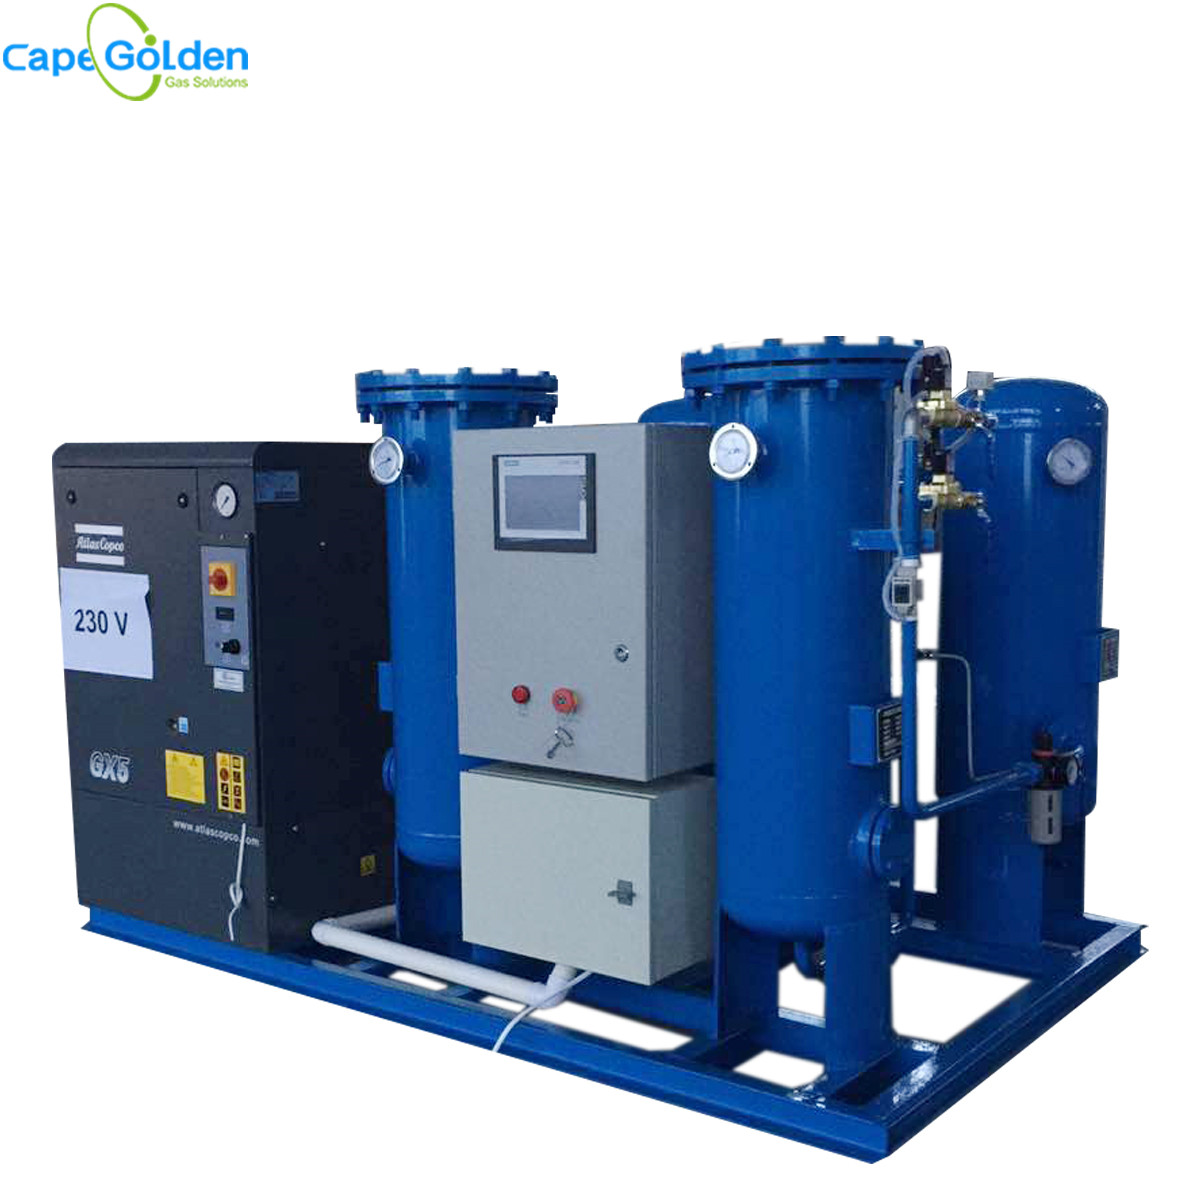 Factory Promotional O2 Generator For Hospital -
 Integrated oxygen generator for filling cylinders – Cape Golden